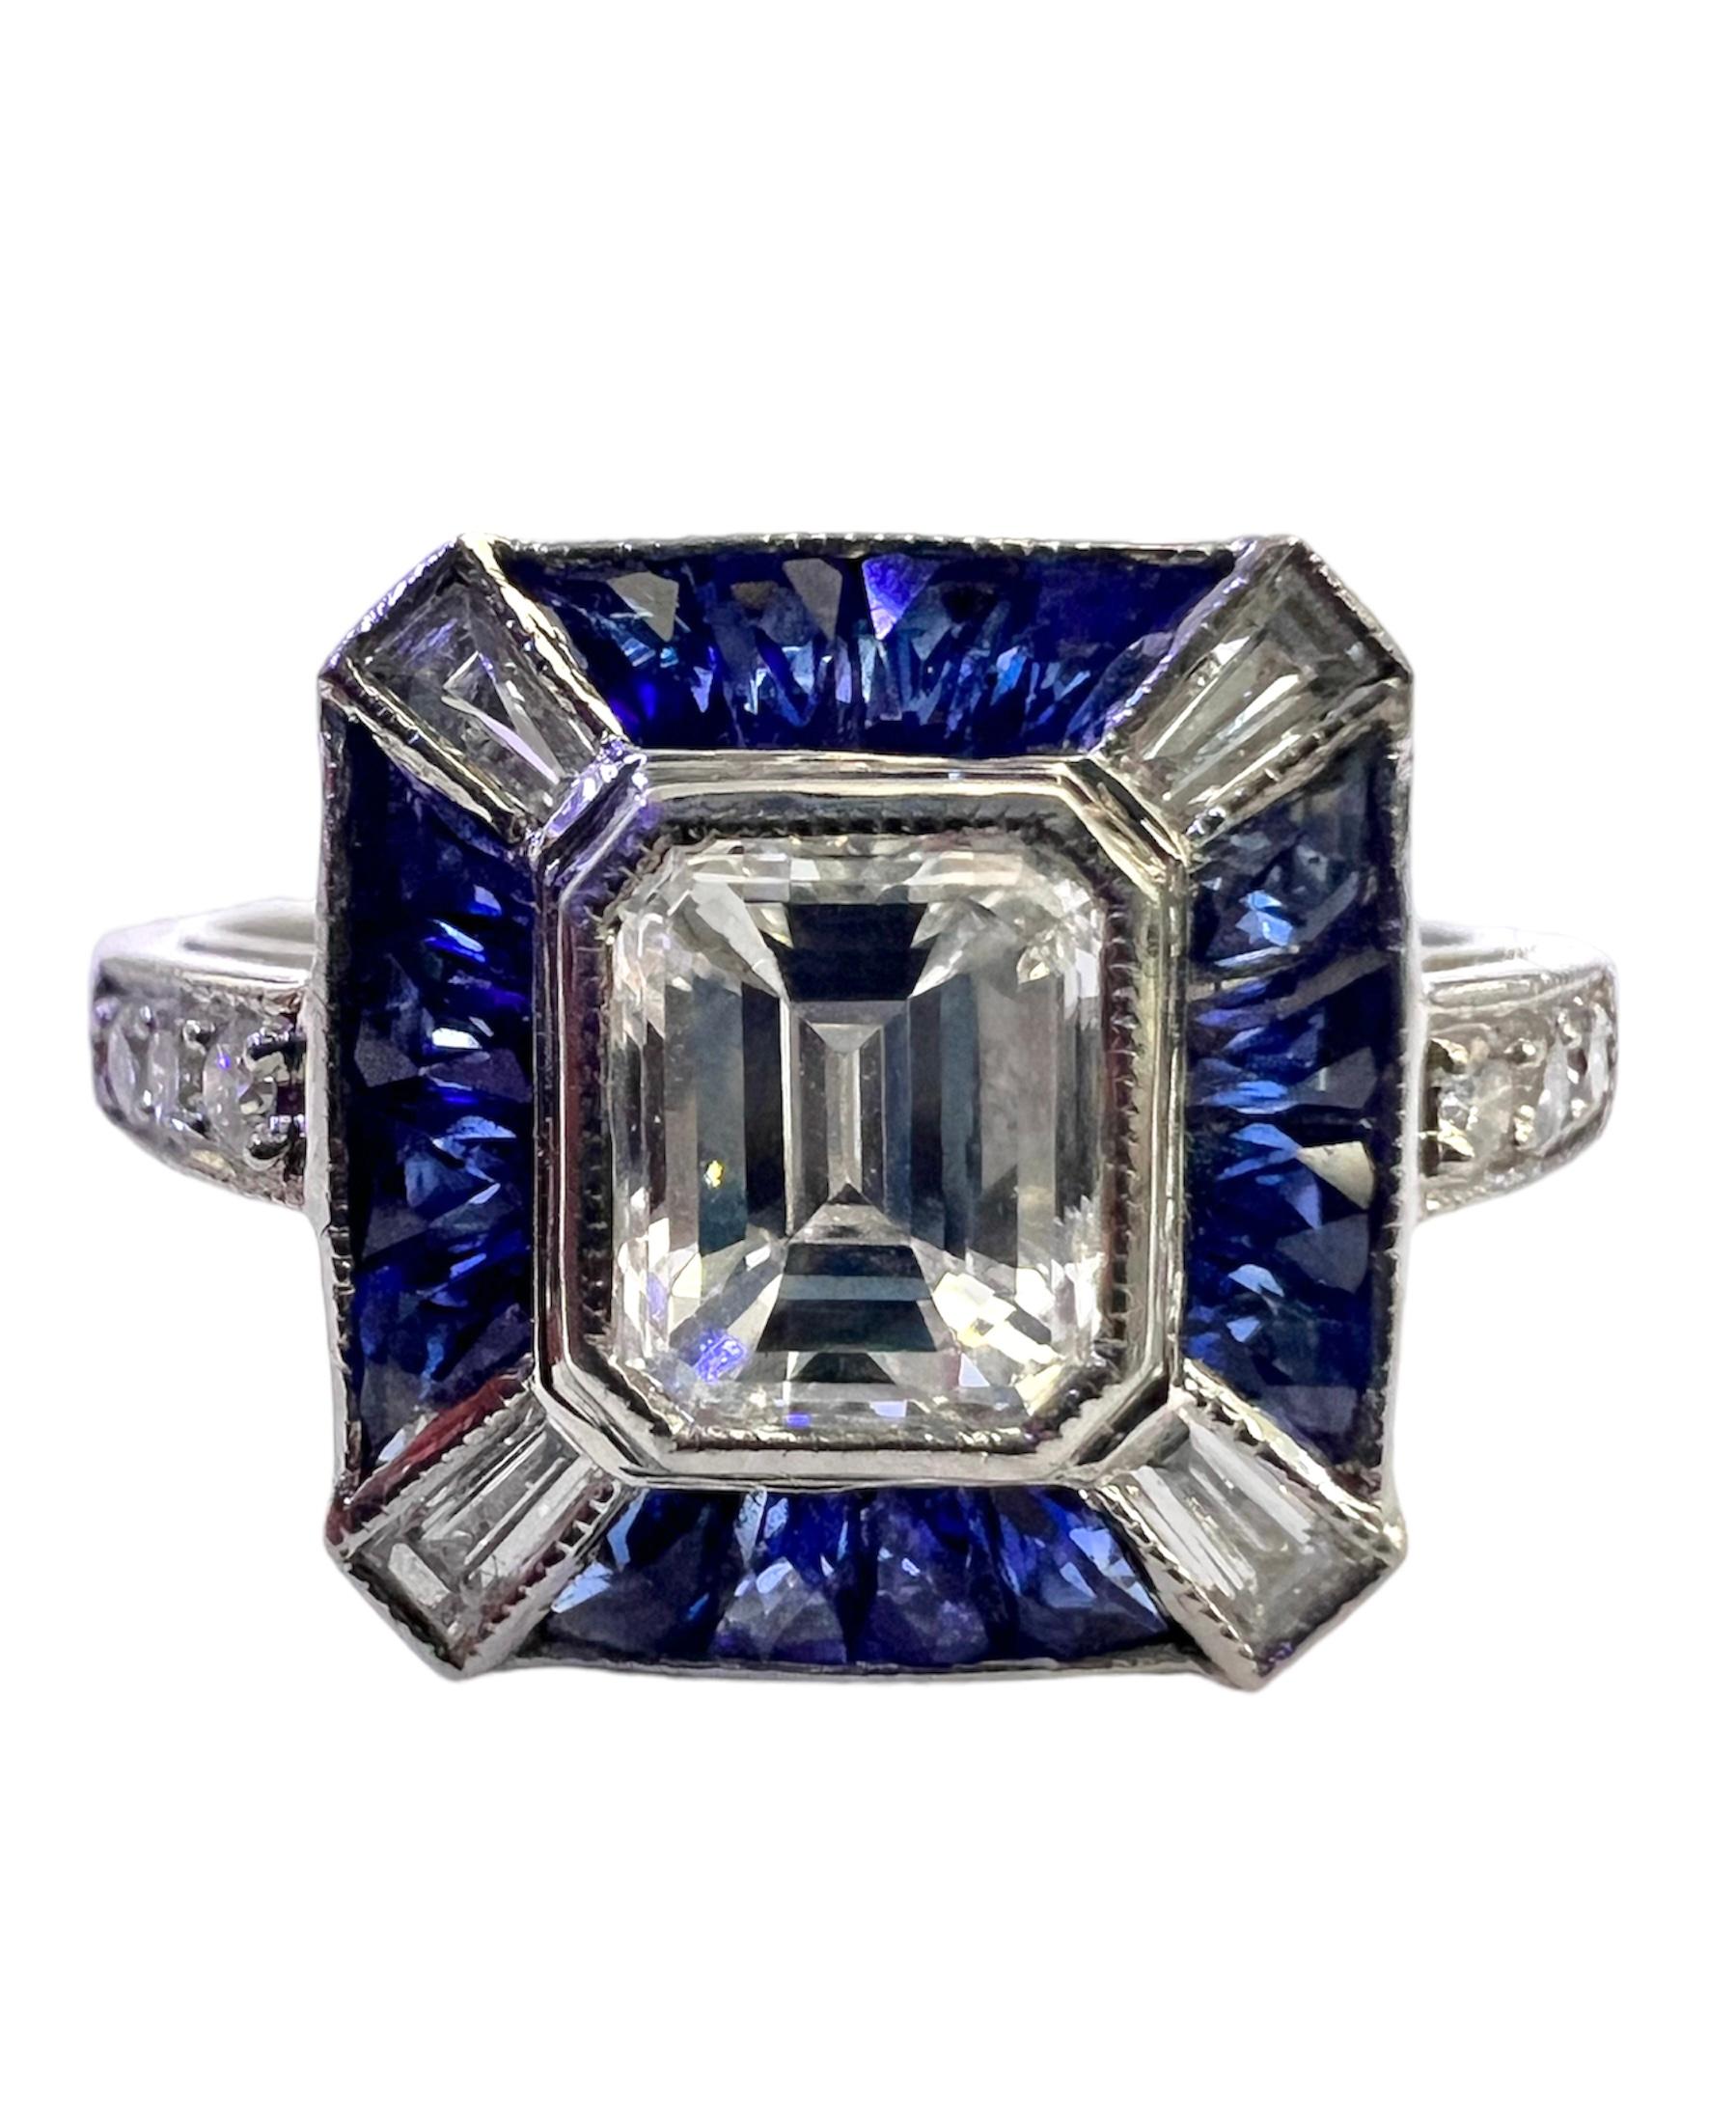 Designed by Sophia D. this platinum ring features a 0.73 carat emerald cut center stone accentuated with 1.57 carat blue sapphire and 0.19 carat diamond.

Sophia D by Joseph Dardashti LTD has been known worldwide for 35 years and are inspired by